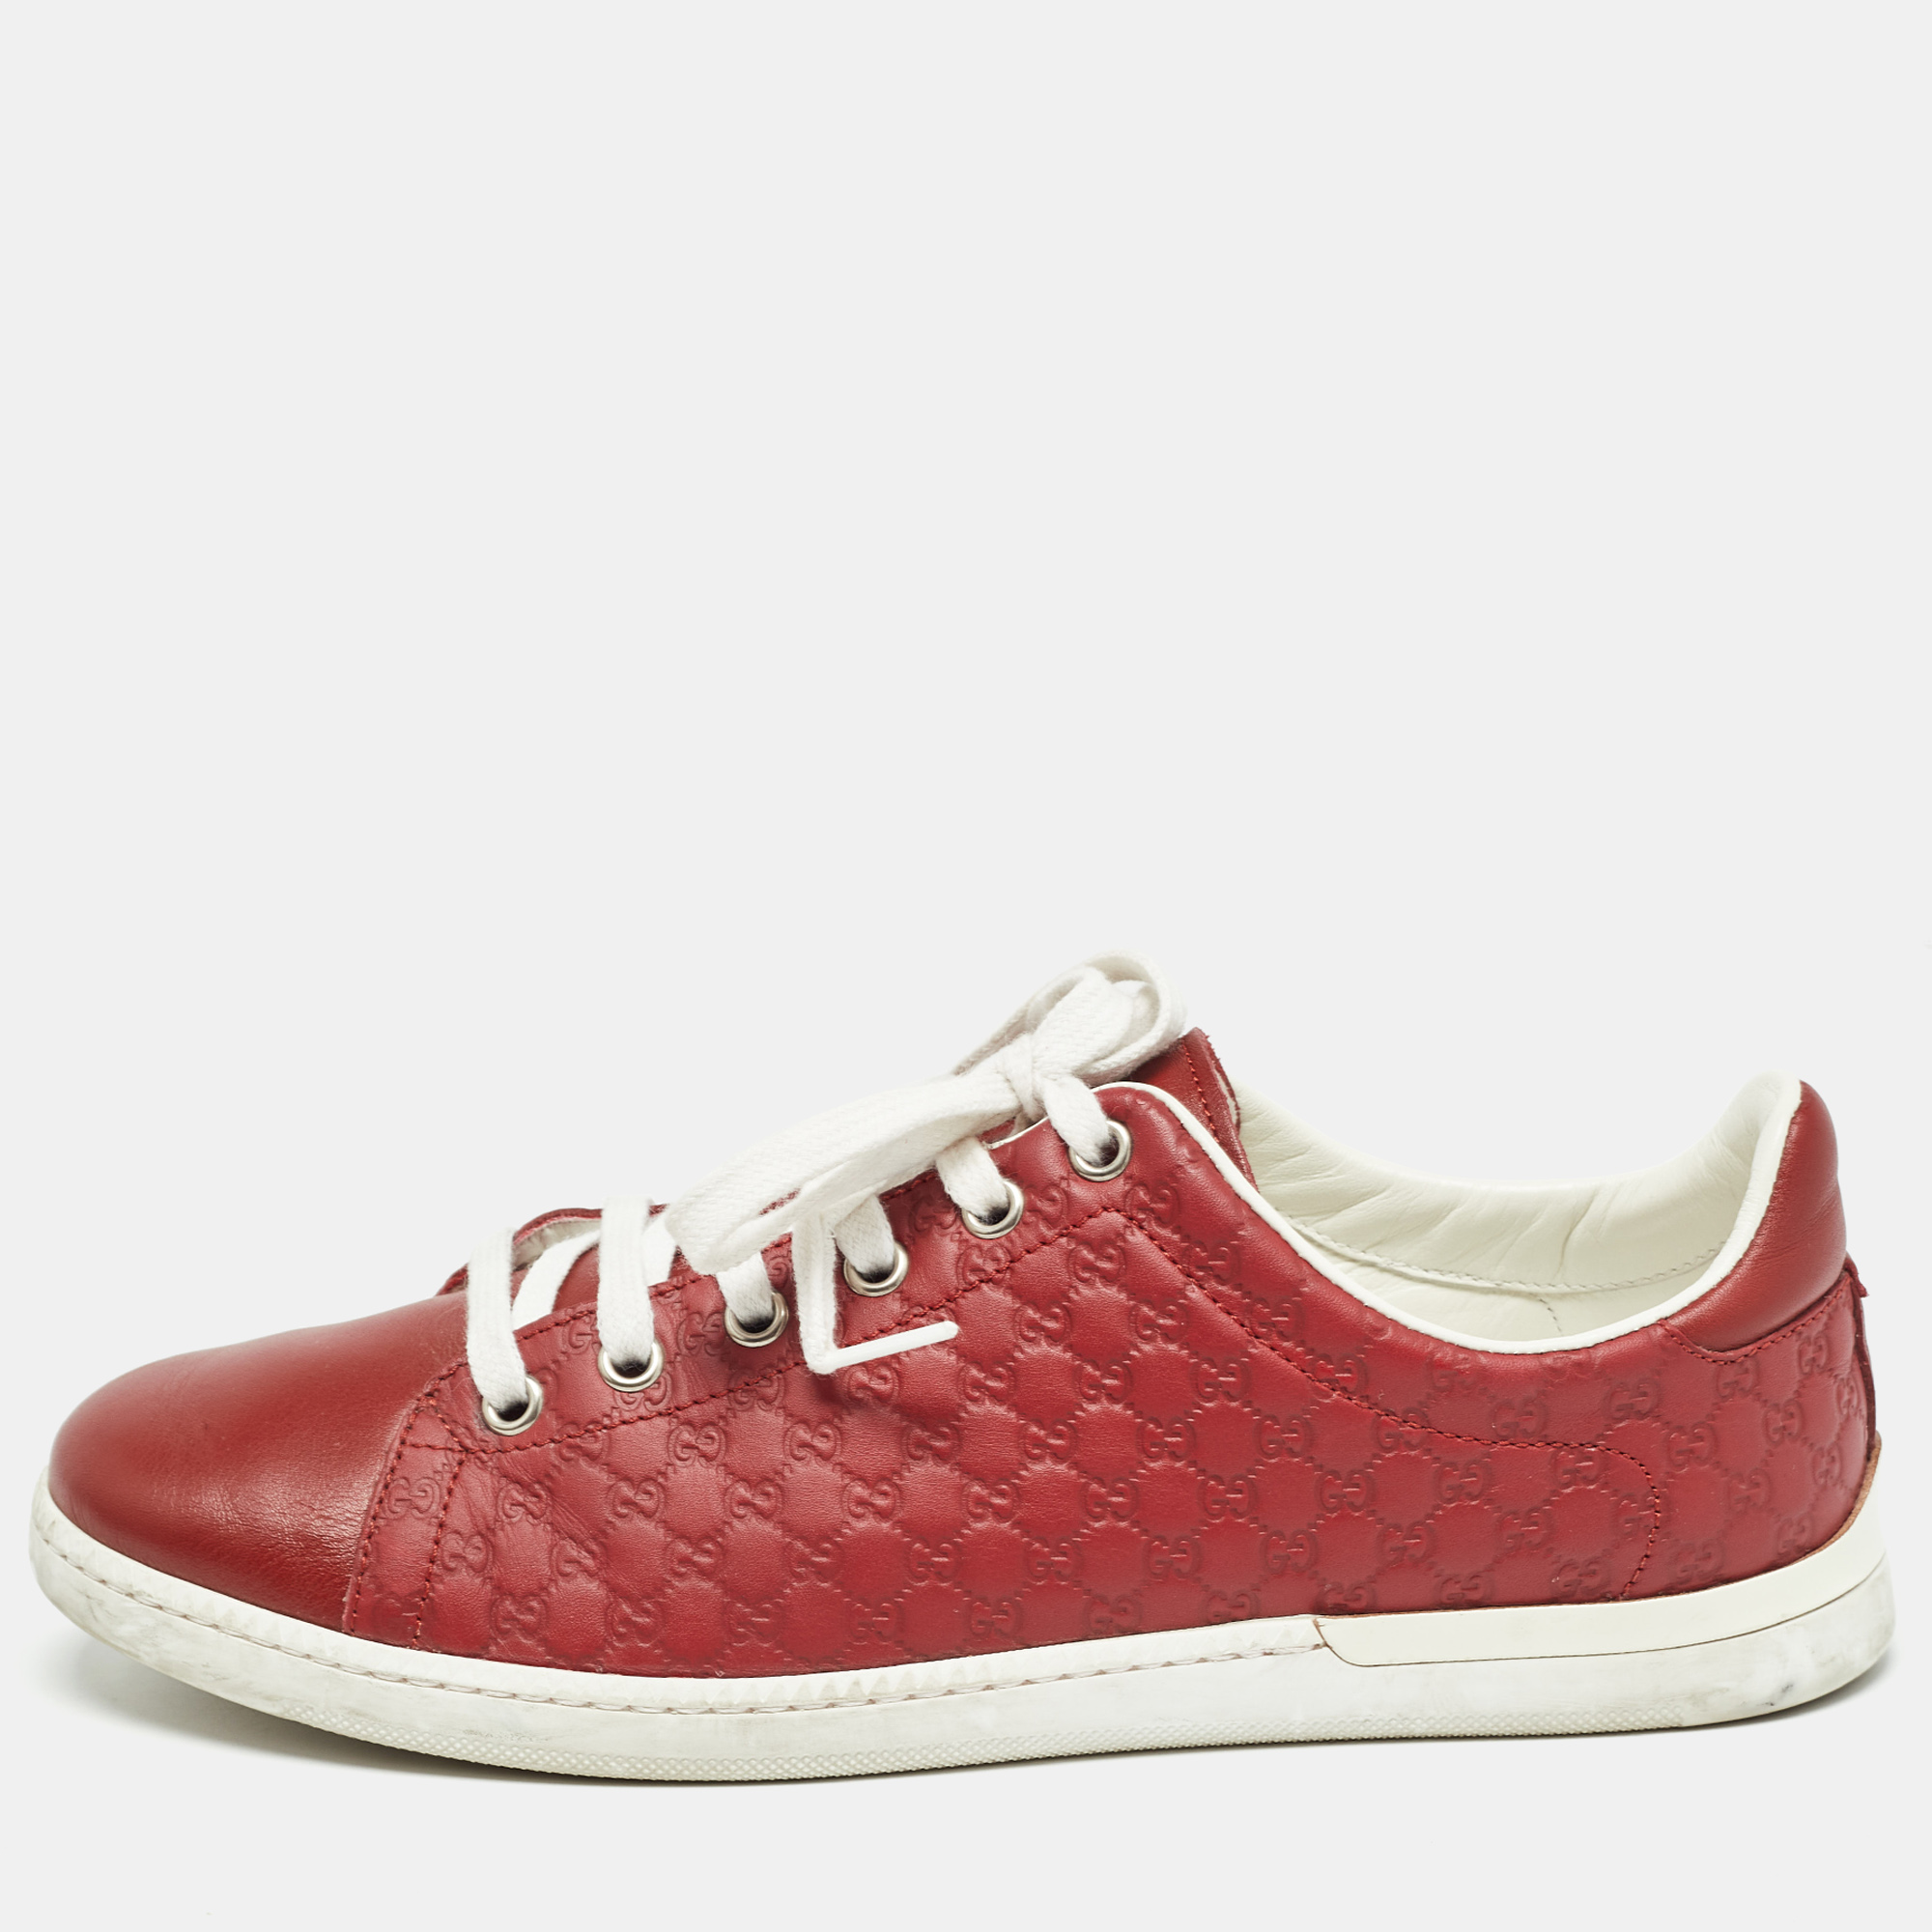 Gucci red microguccissima leather low top sneakers size 38